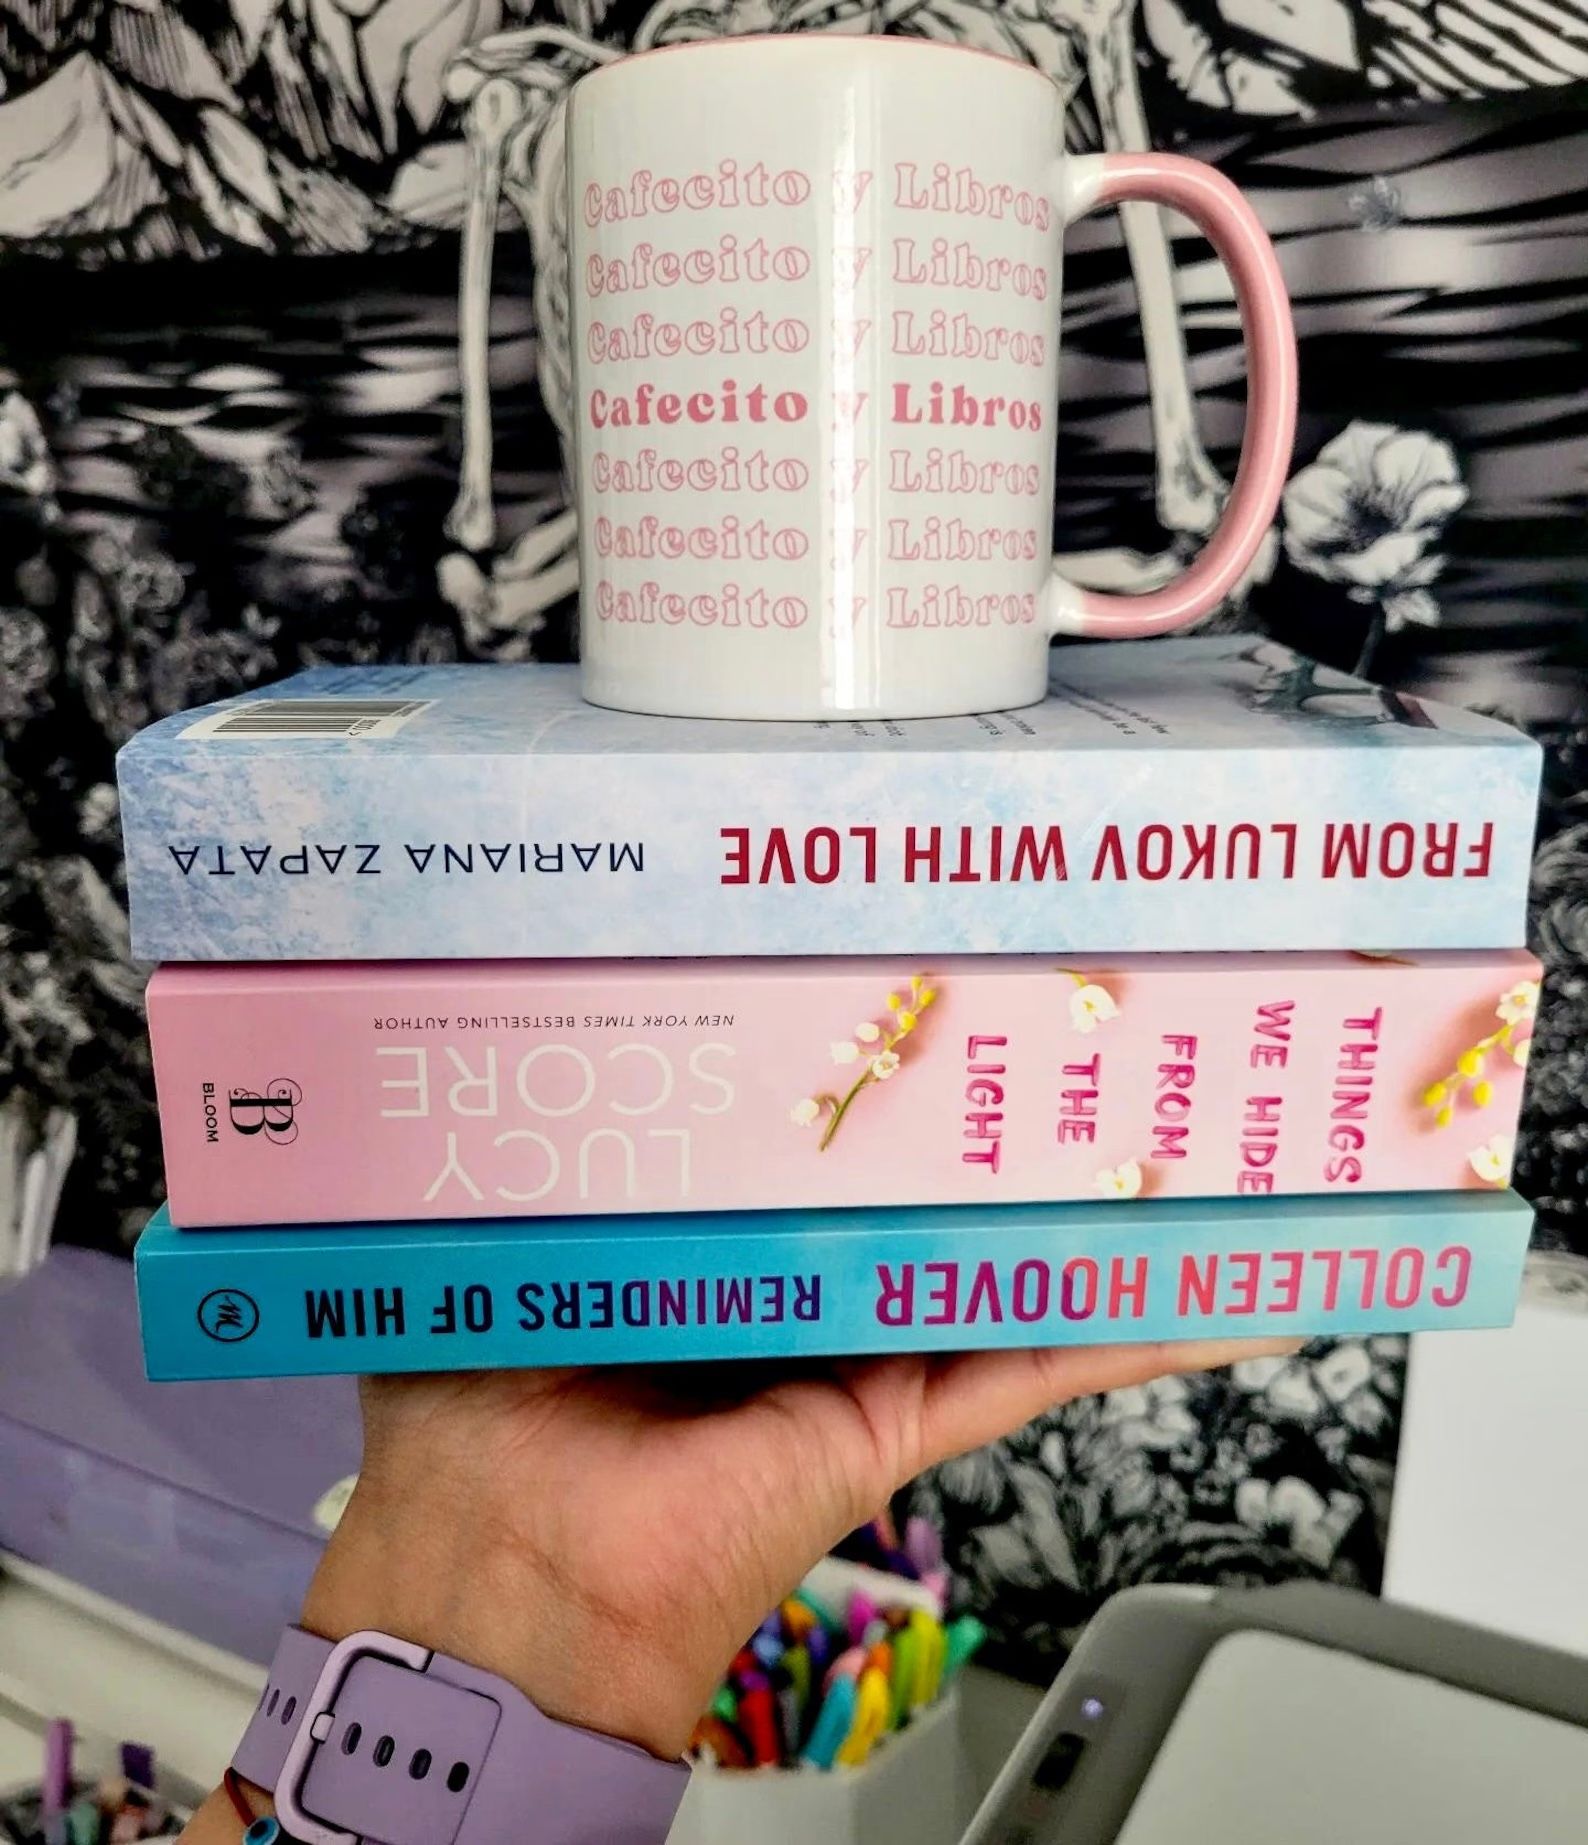 a pink and white mug on top of a stack of three books. The pink text on the mug reads "cafecito y libros"